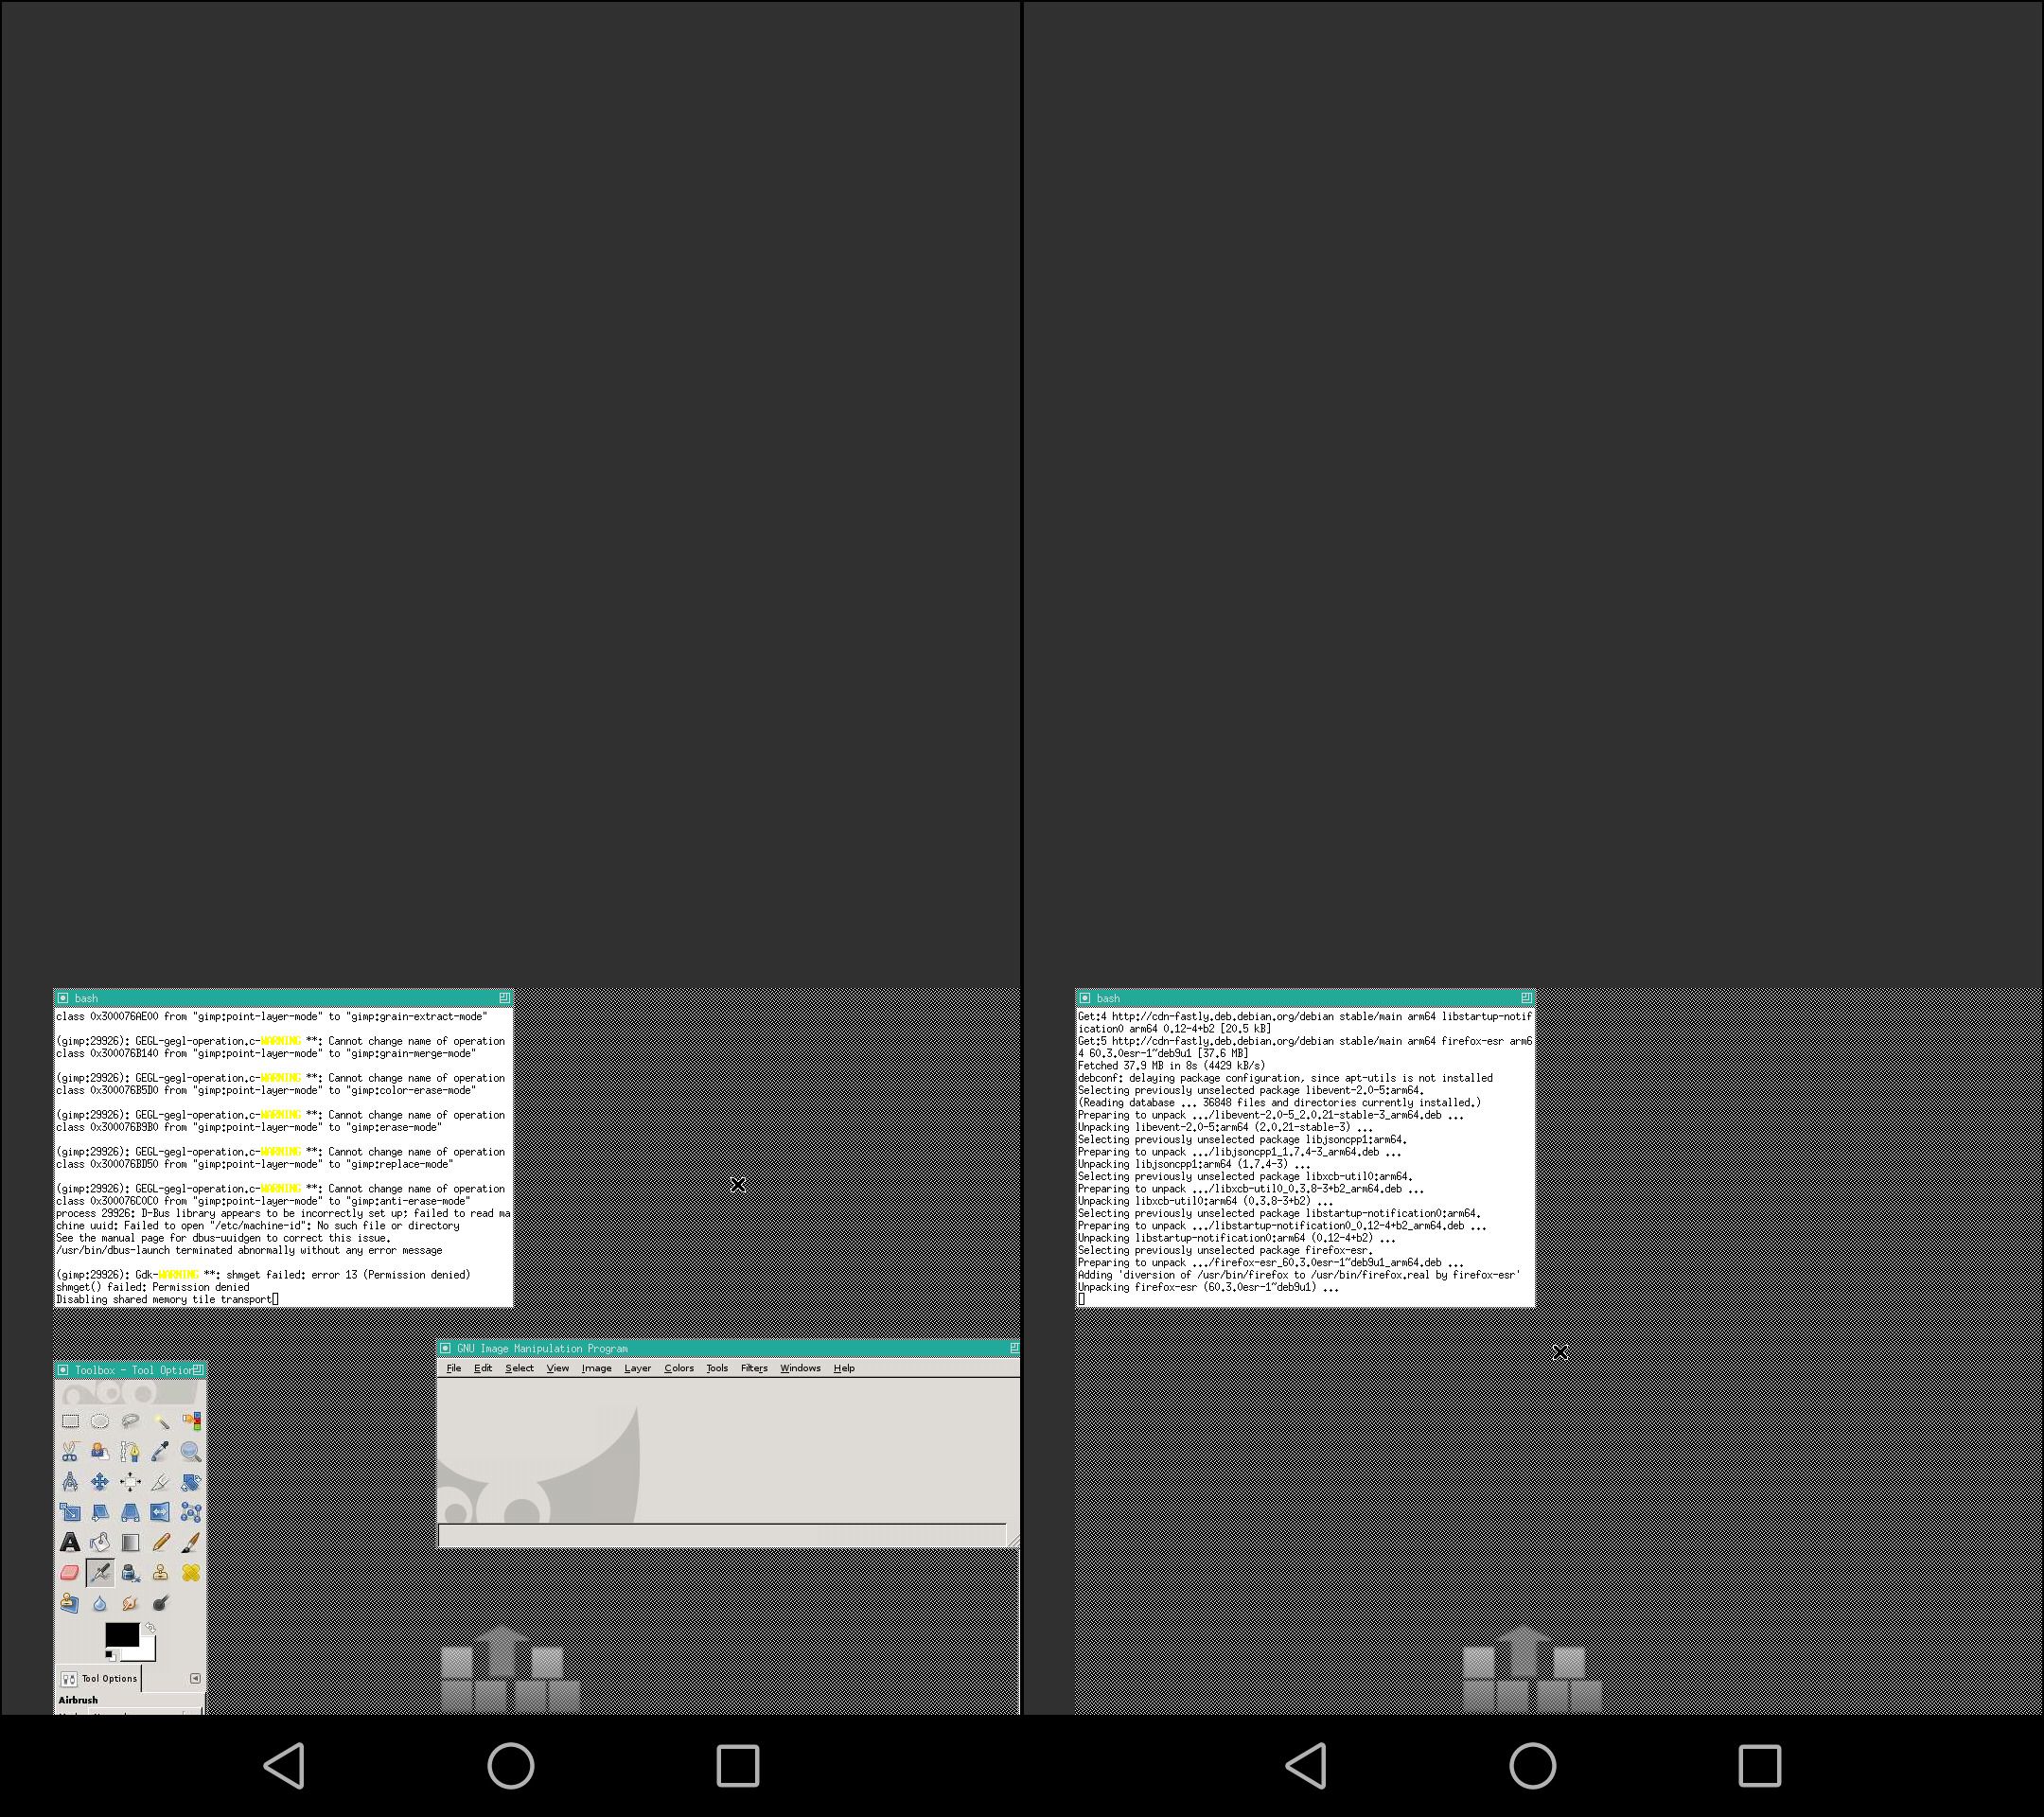 userland linux on android